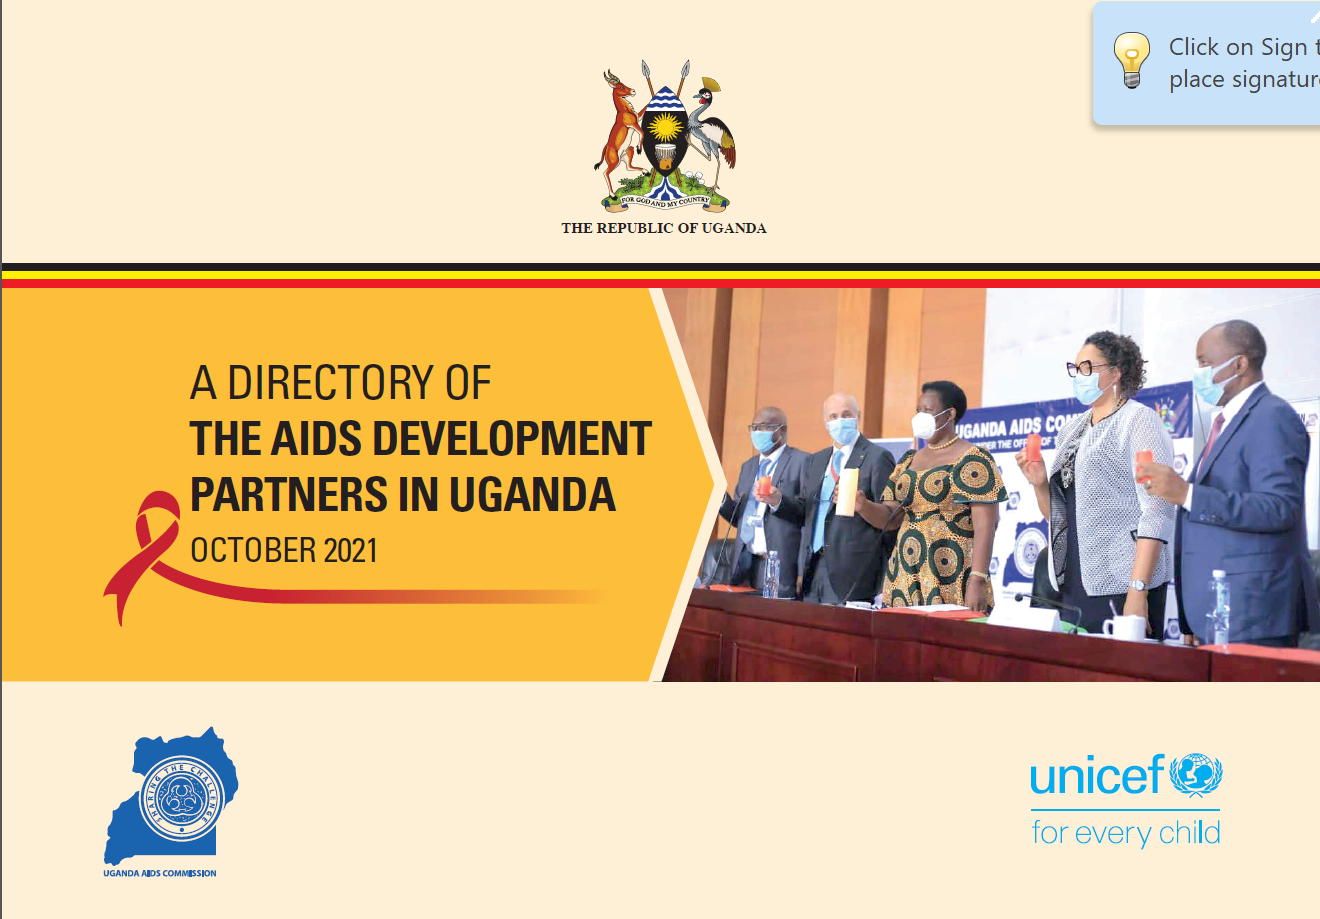 A DIRECTORY OF THE AIDS DEVELOPMENT PARTNERS IN UGANDA OCTOBER 2021